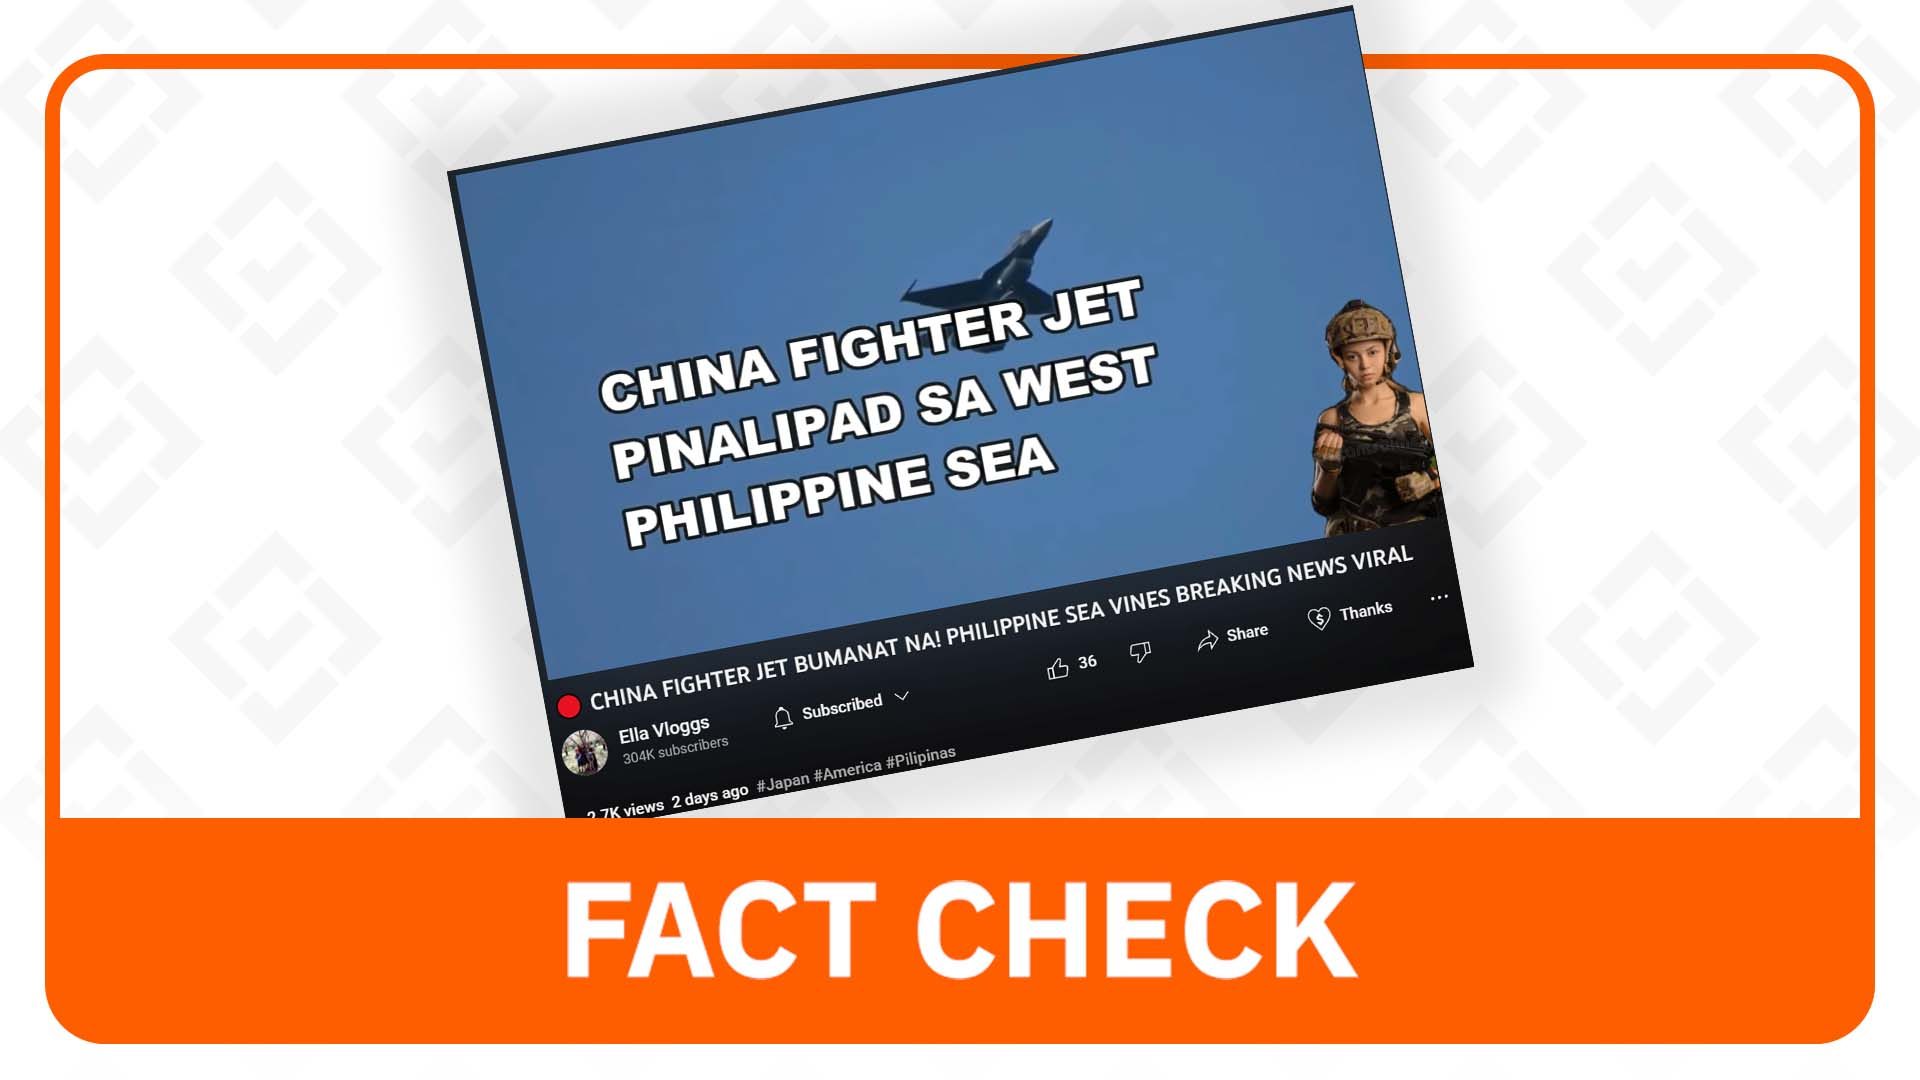 FACT CHECK: Video shows a Japanese F-2 fighter plane, not a Chinese jet 